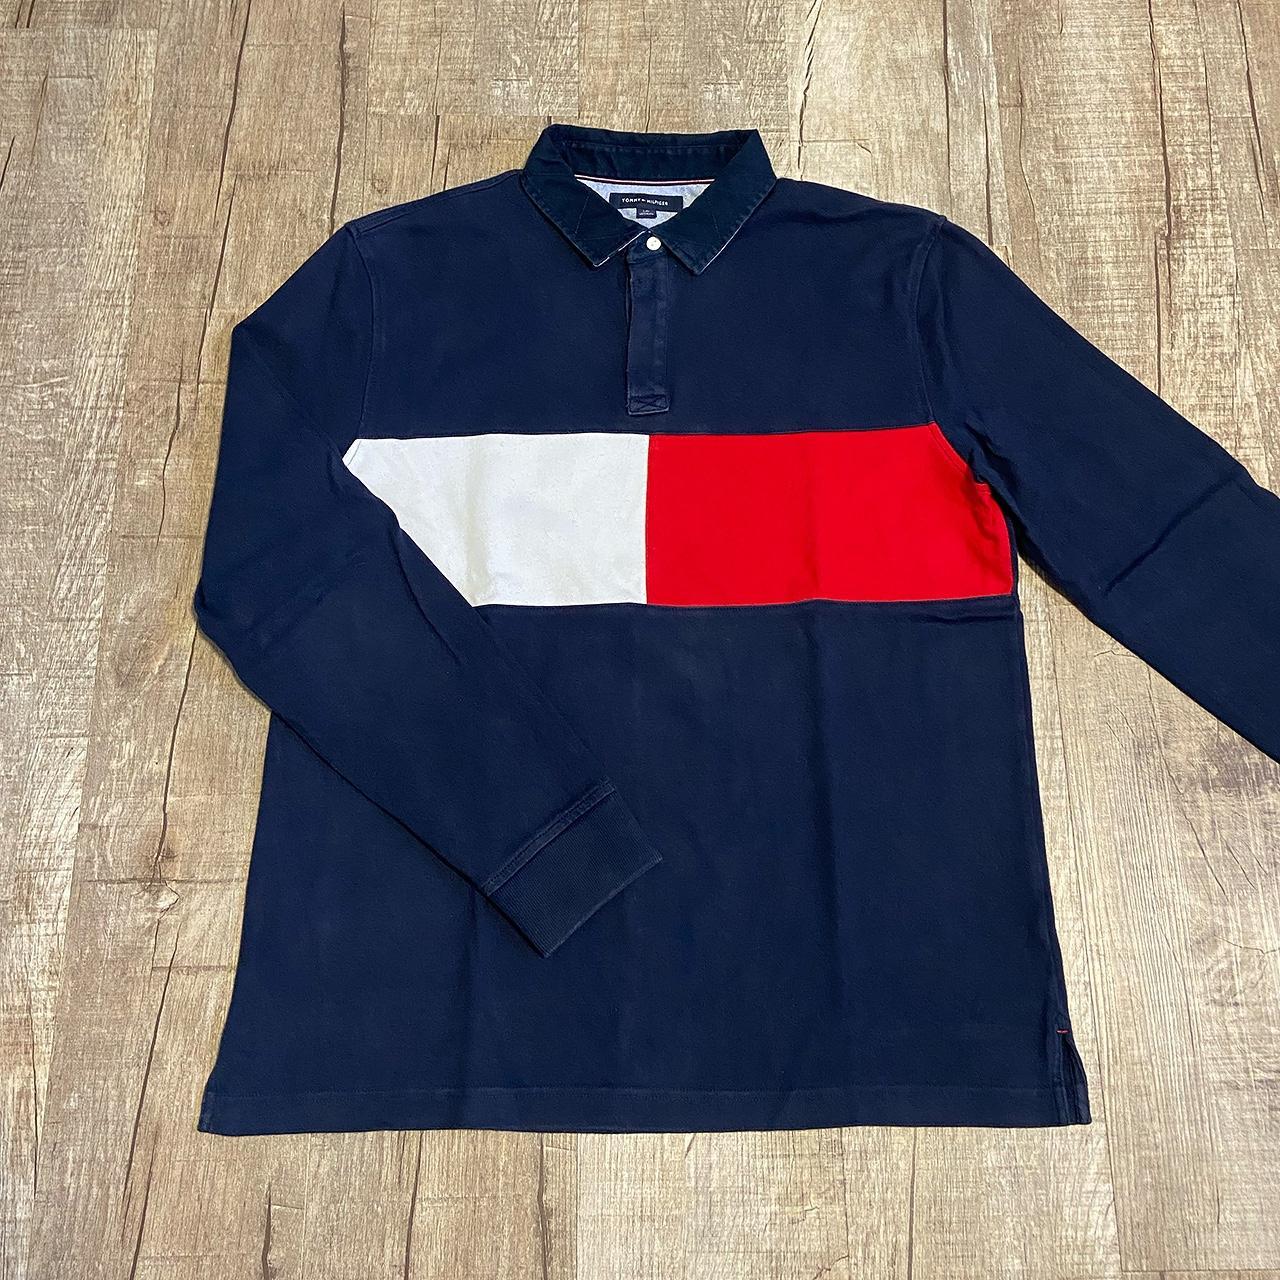 Tommy Hilfiger Men's Navy and Red Polo-shirts | Depop